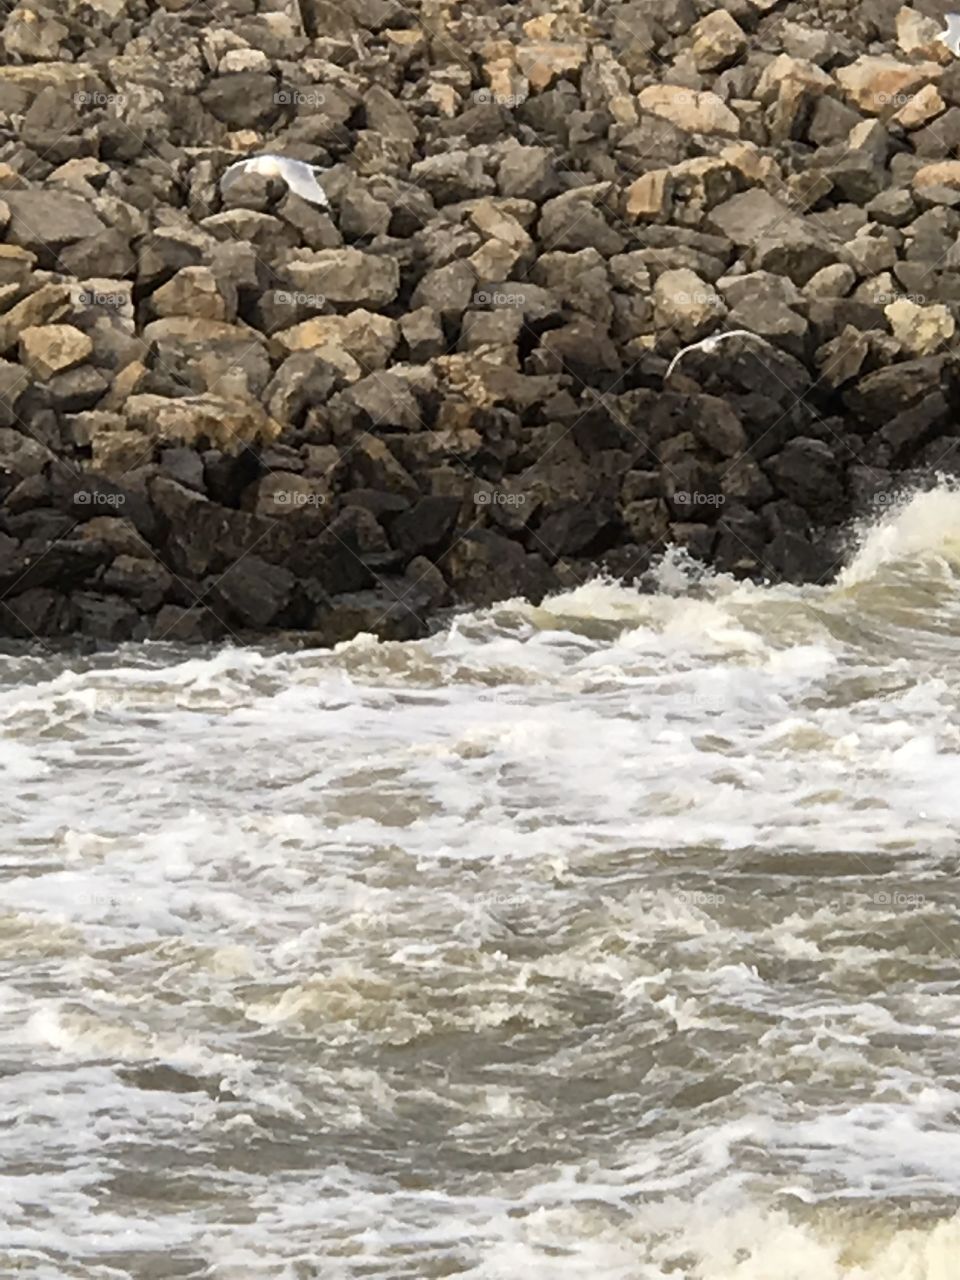 US Army Corps of Engineers, Oologah Lake Oklahoma water release area, Winter-January, water in channel, shore boulders of riprap, foam on water, seagulls flying and catching fish.